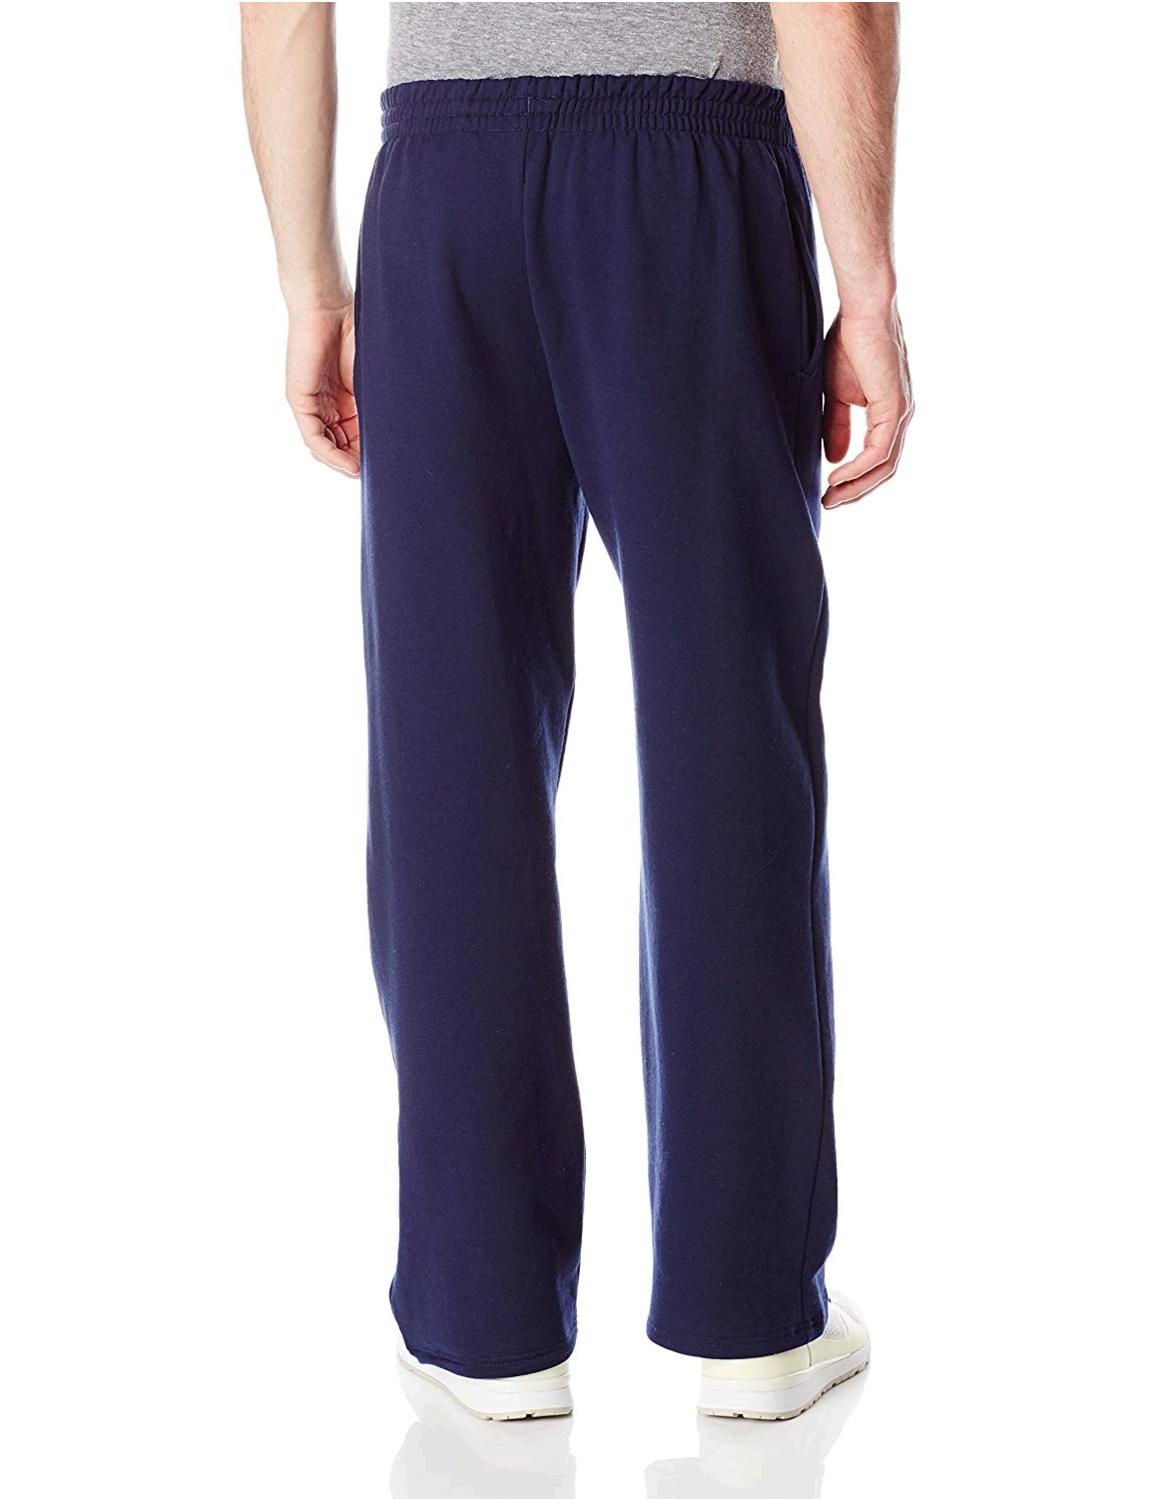 Fruit of the Loom Men's Pocketed Open-Bottom Sweatpant,, Navy, Size XX ...